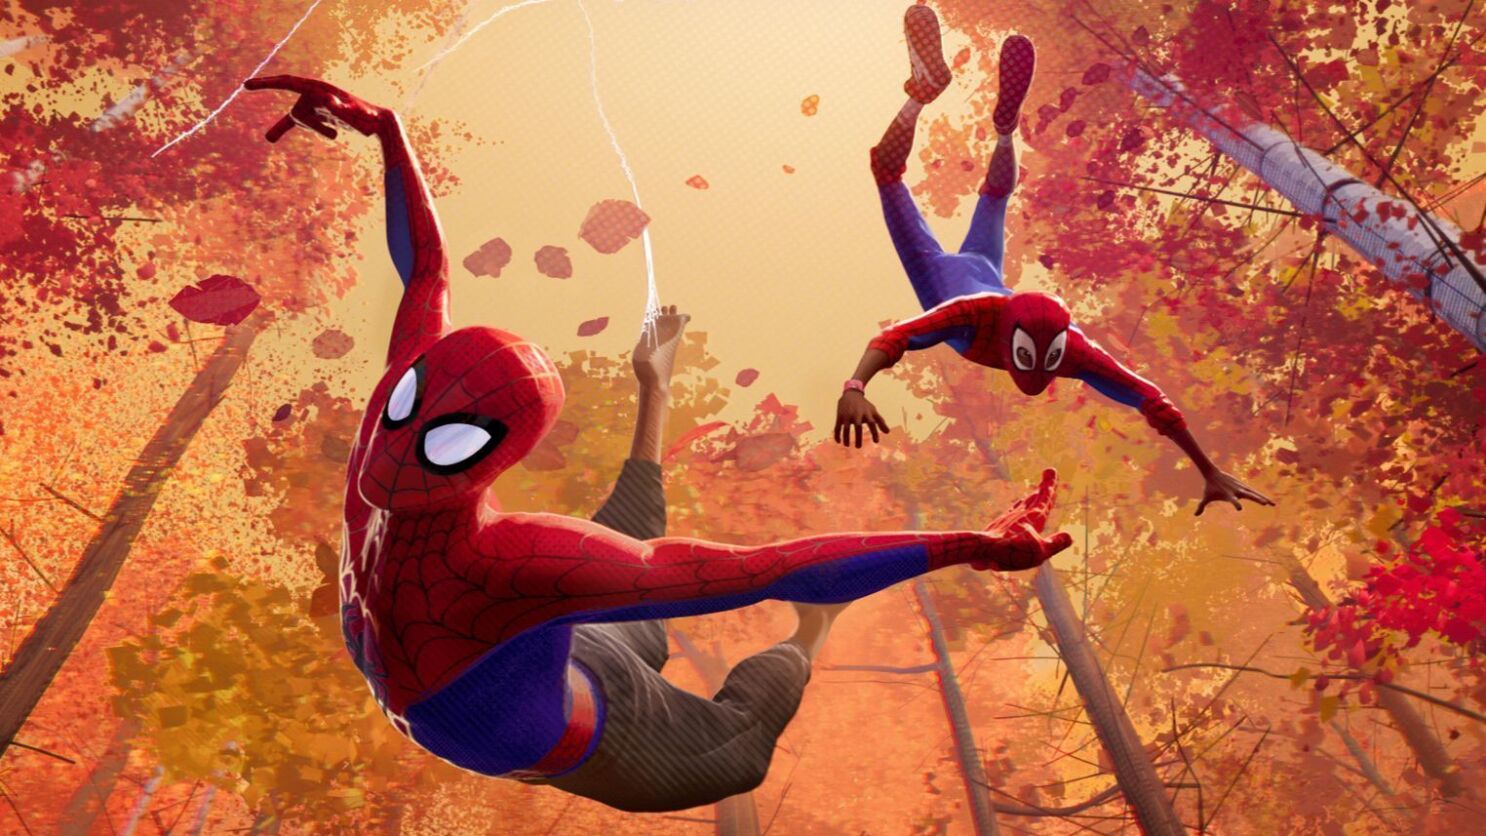 New Video Spider Man Into The Spider Verse Sets The Standard For Superhero Films Los Angeles Times